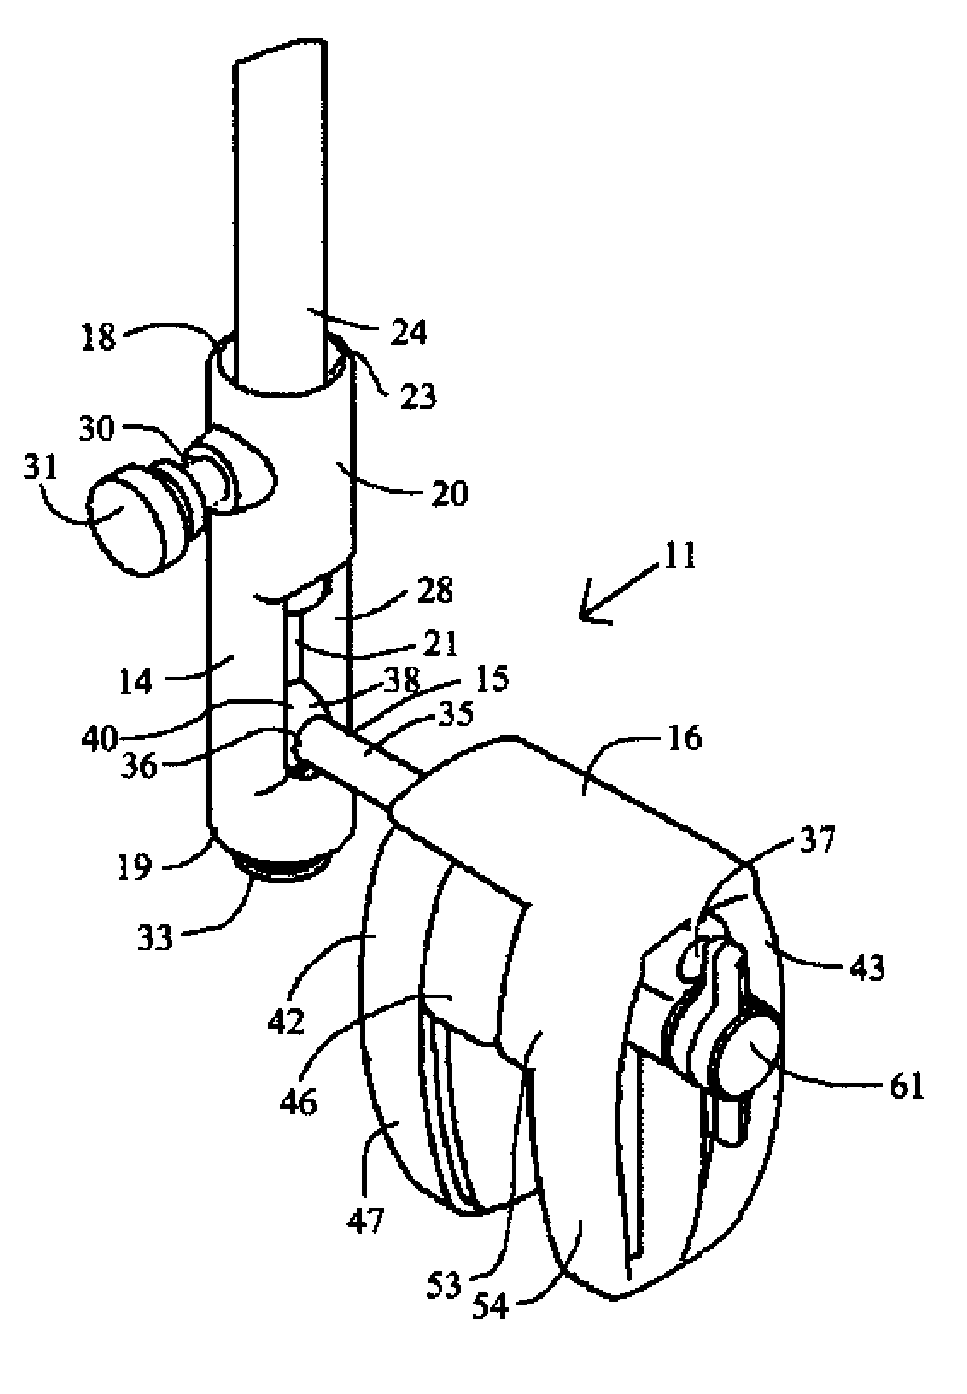 Pole mounting device